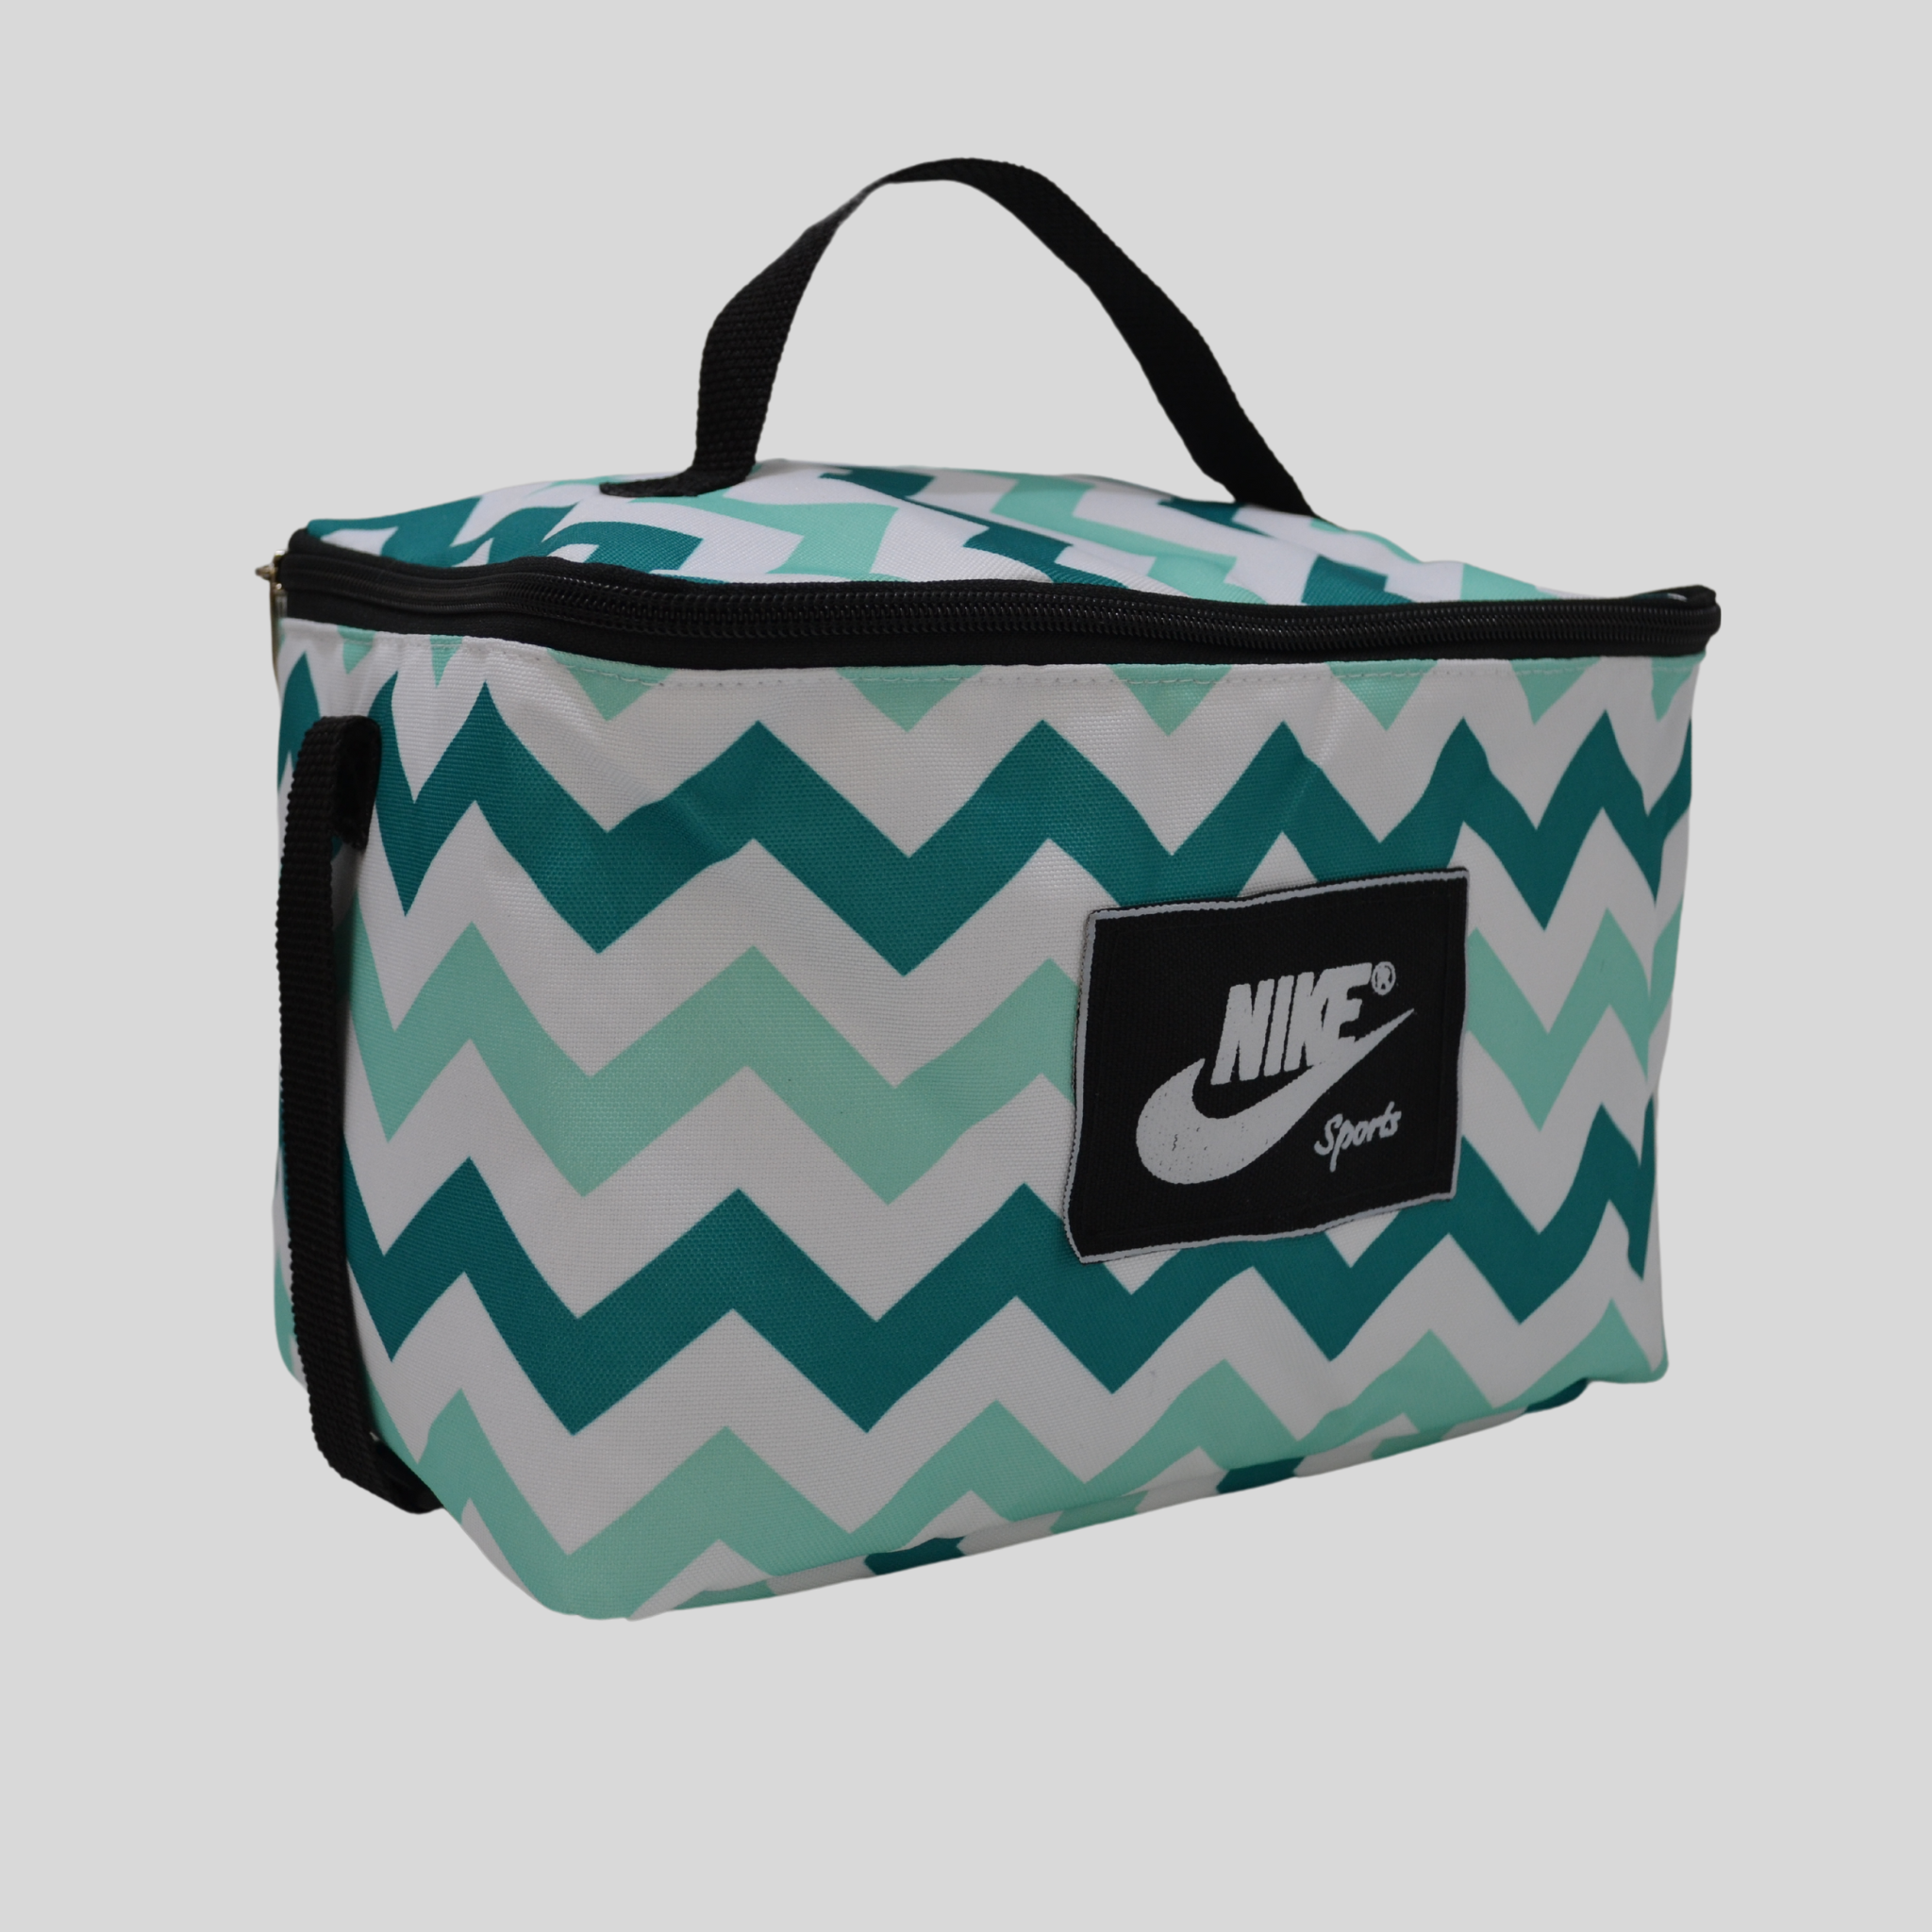 Nike Futura Fuel Insulated Kids Lunch Bag, Safety Orange 